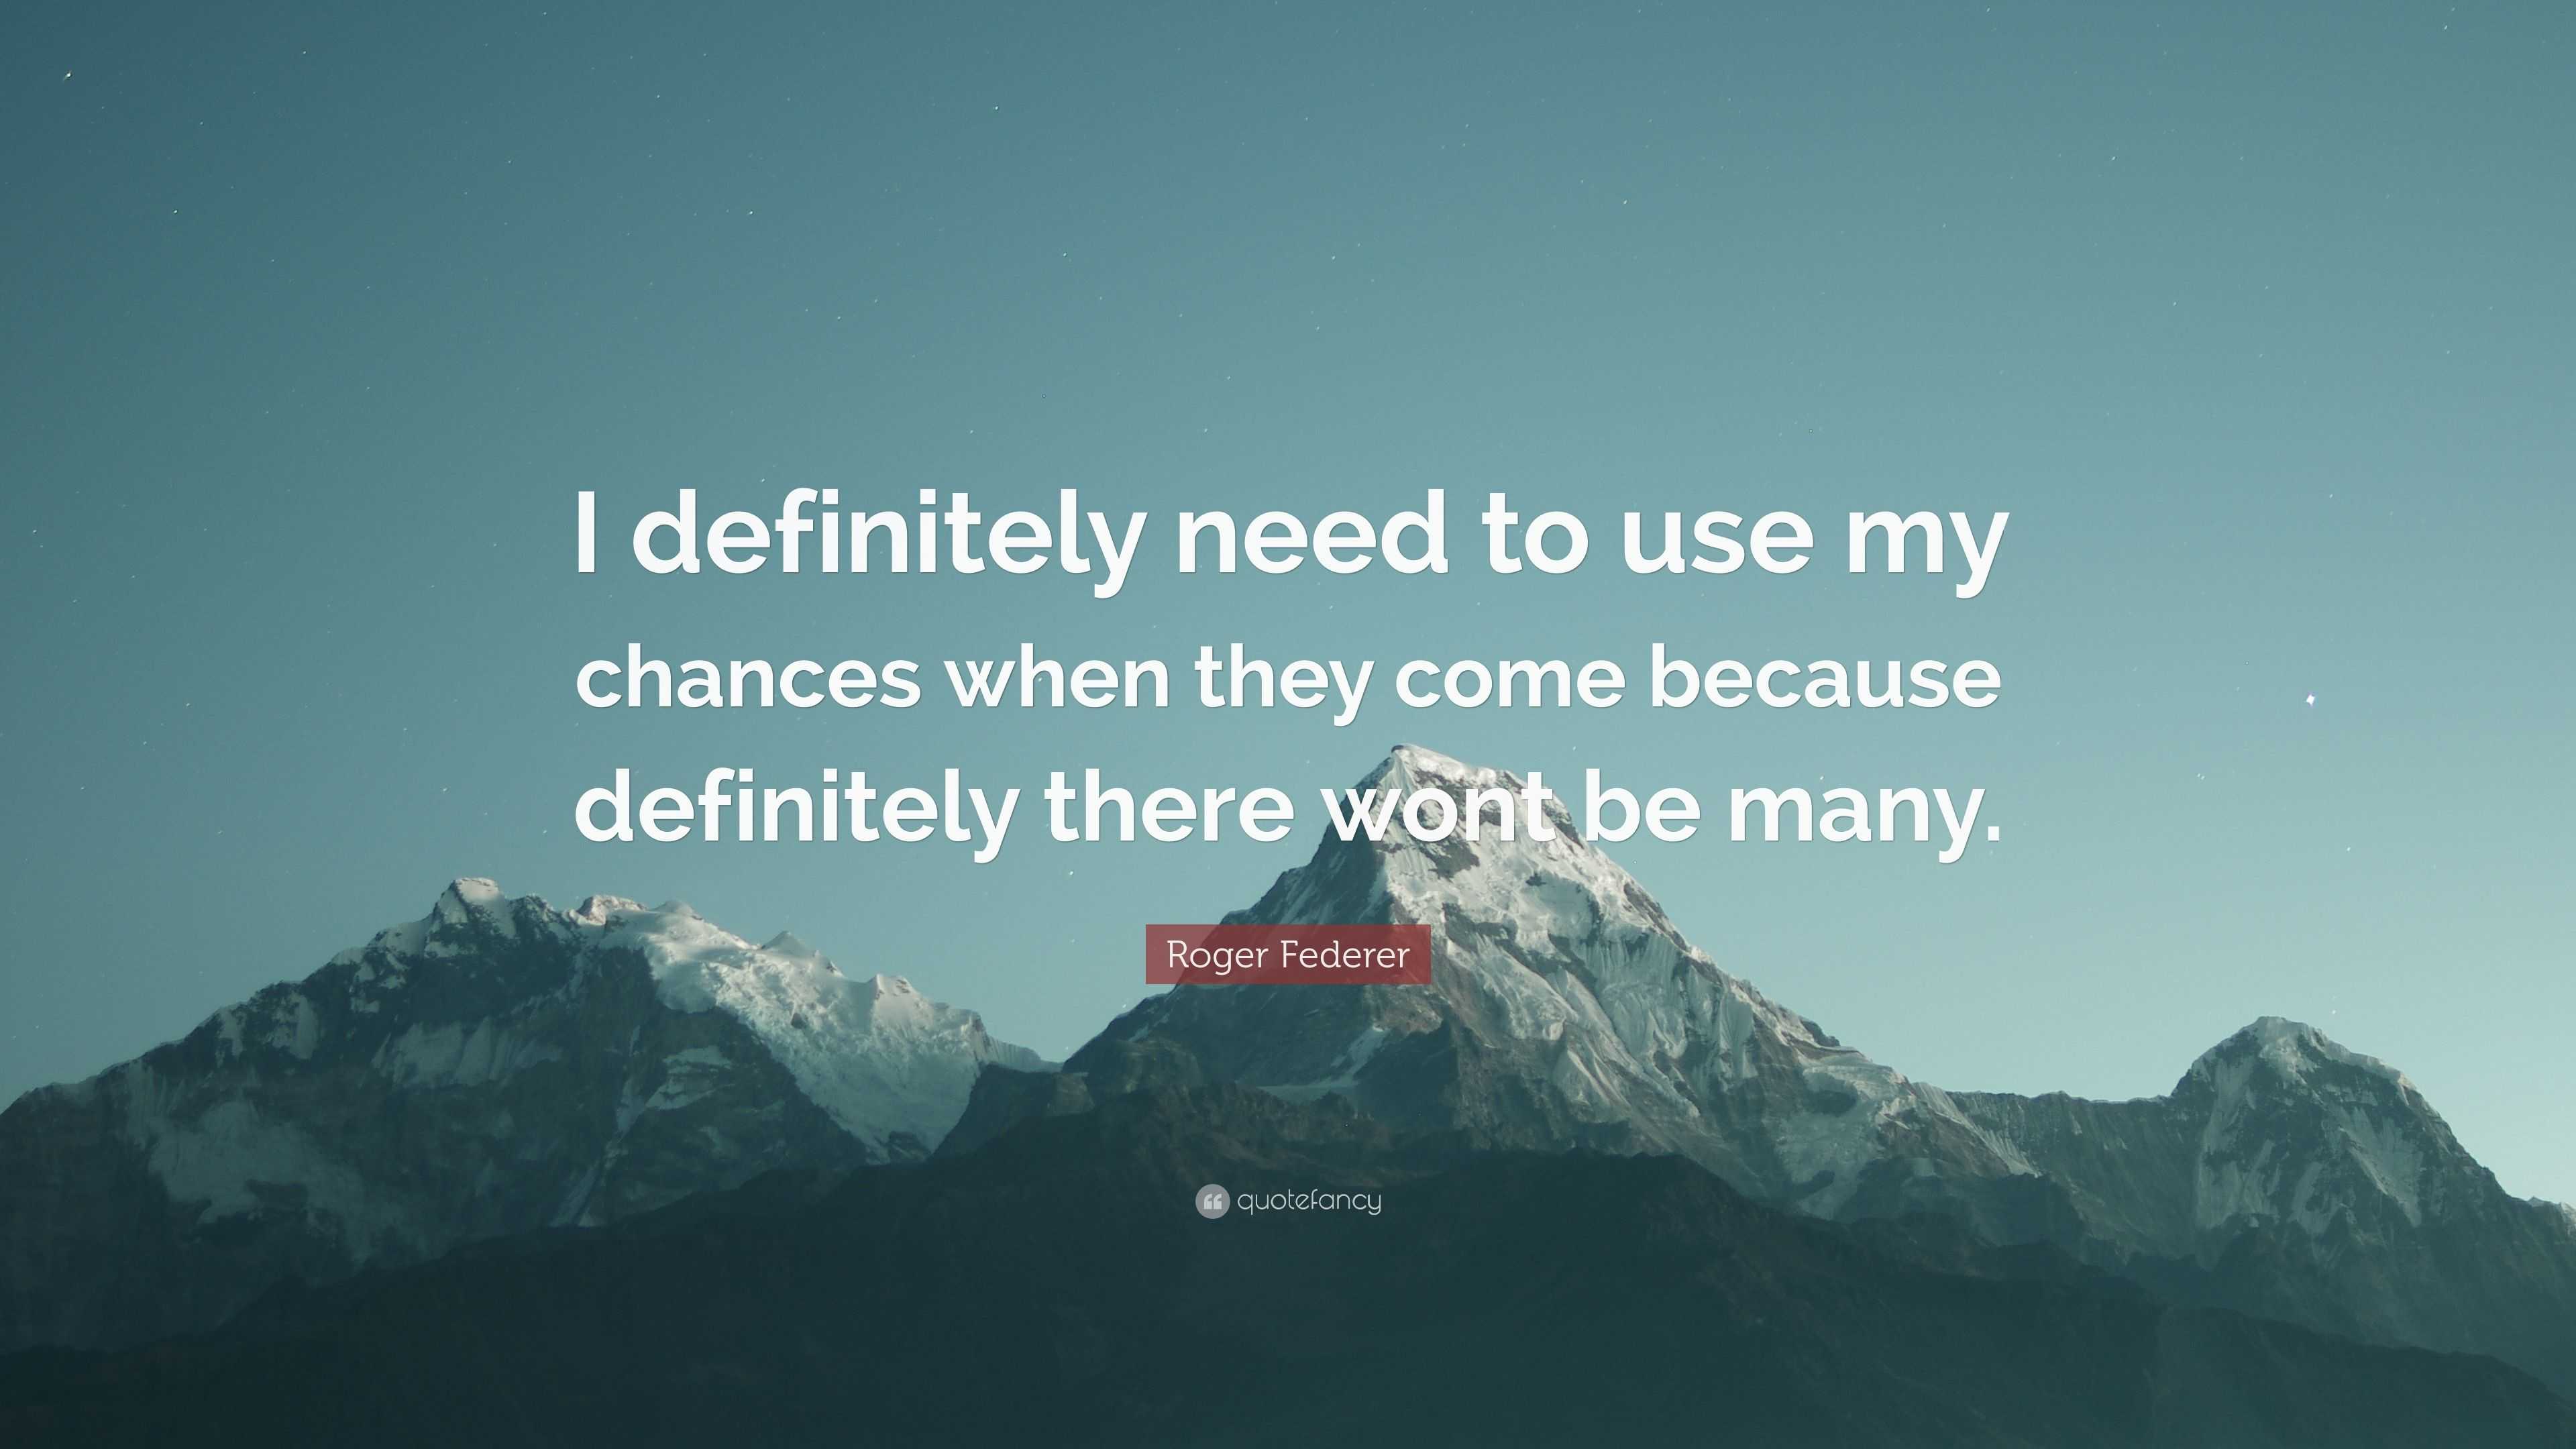 Roger Federer Quote: “I definitely need to use my chances when they ...